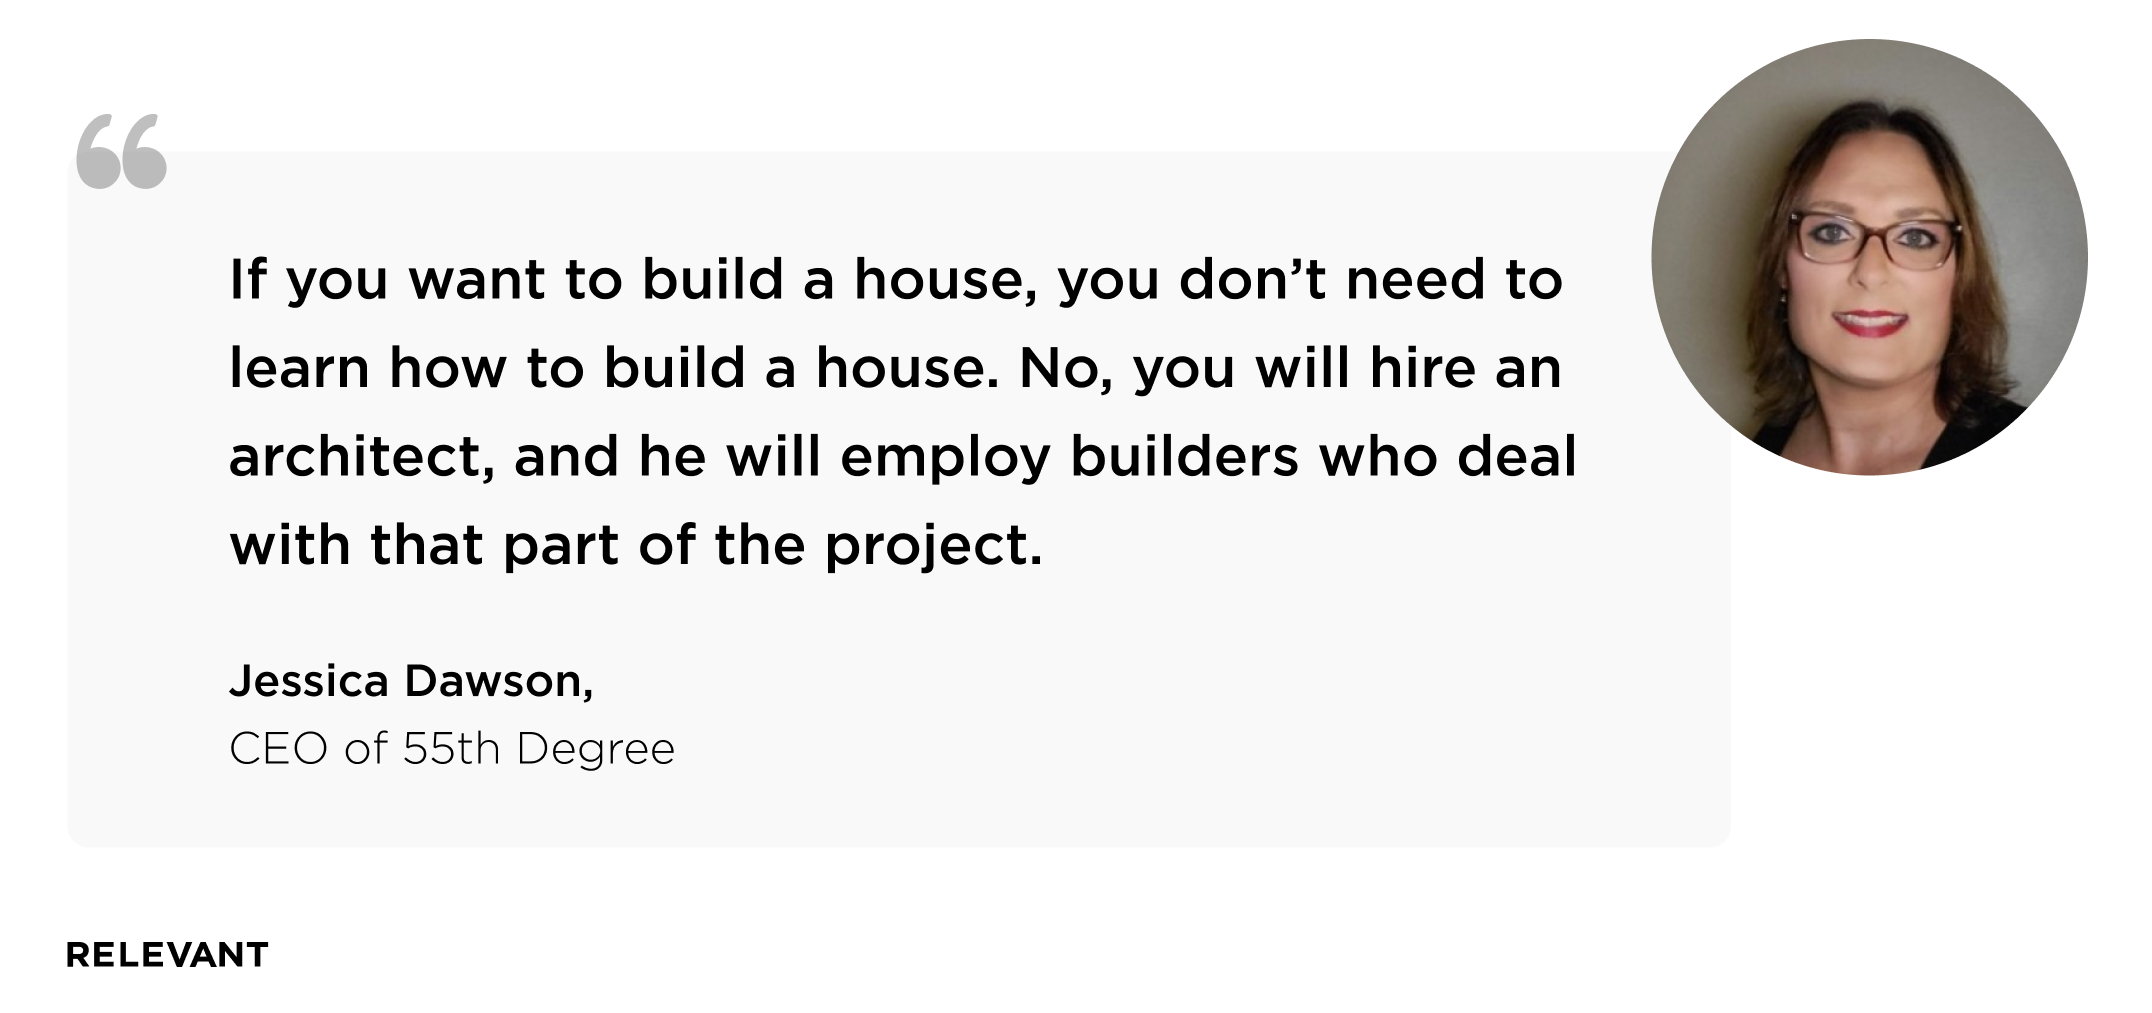 “If you want to build a house, you don’t need to learn how to build a house. No, you will hire an architect, and he will employ builders who deal with that part of the project.” Jessica Dawson, CEO of 55th Degree